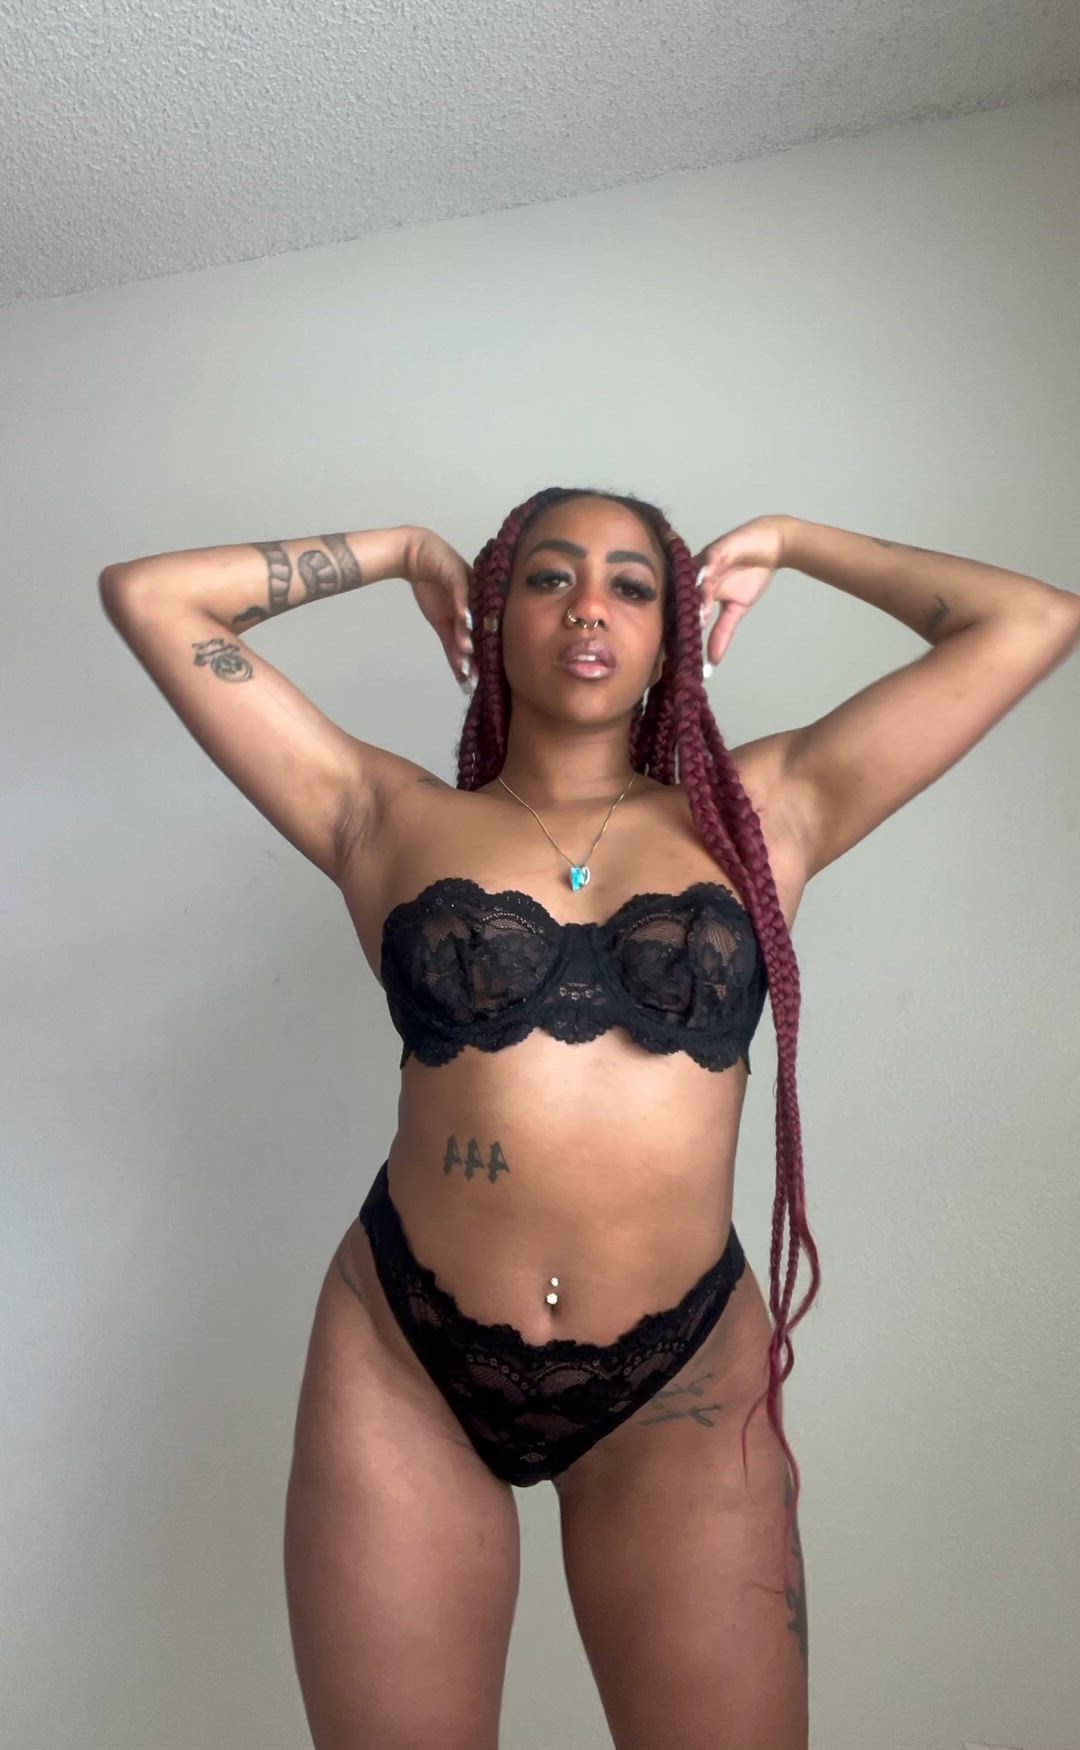 Ass porn video with onlyfans model 444addy <strong>@444addy</strong>